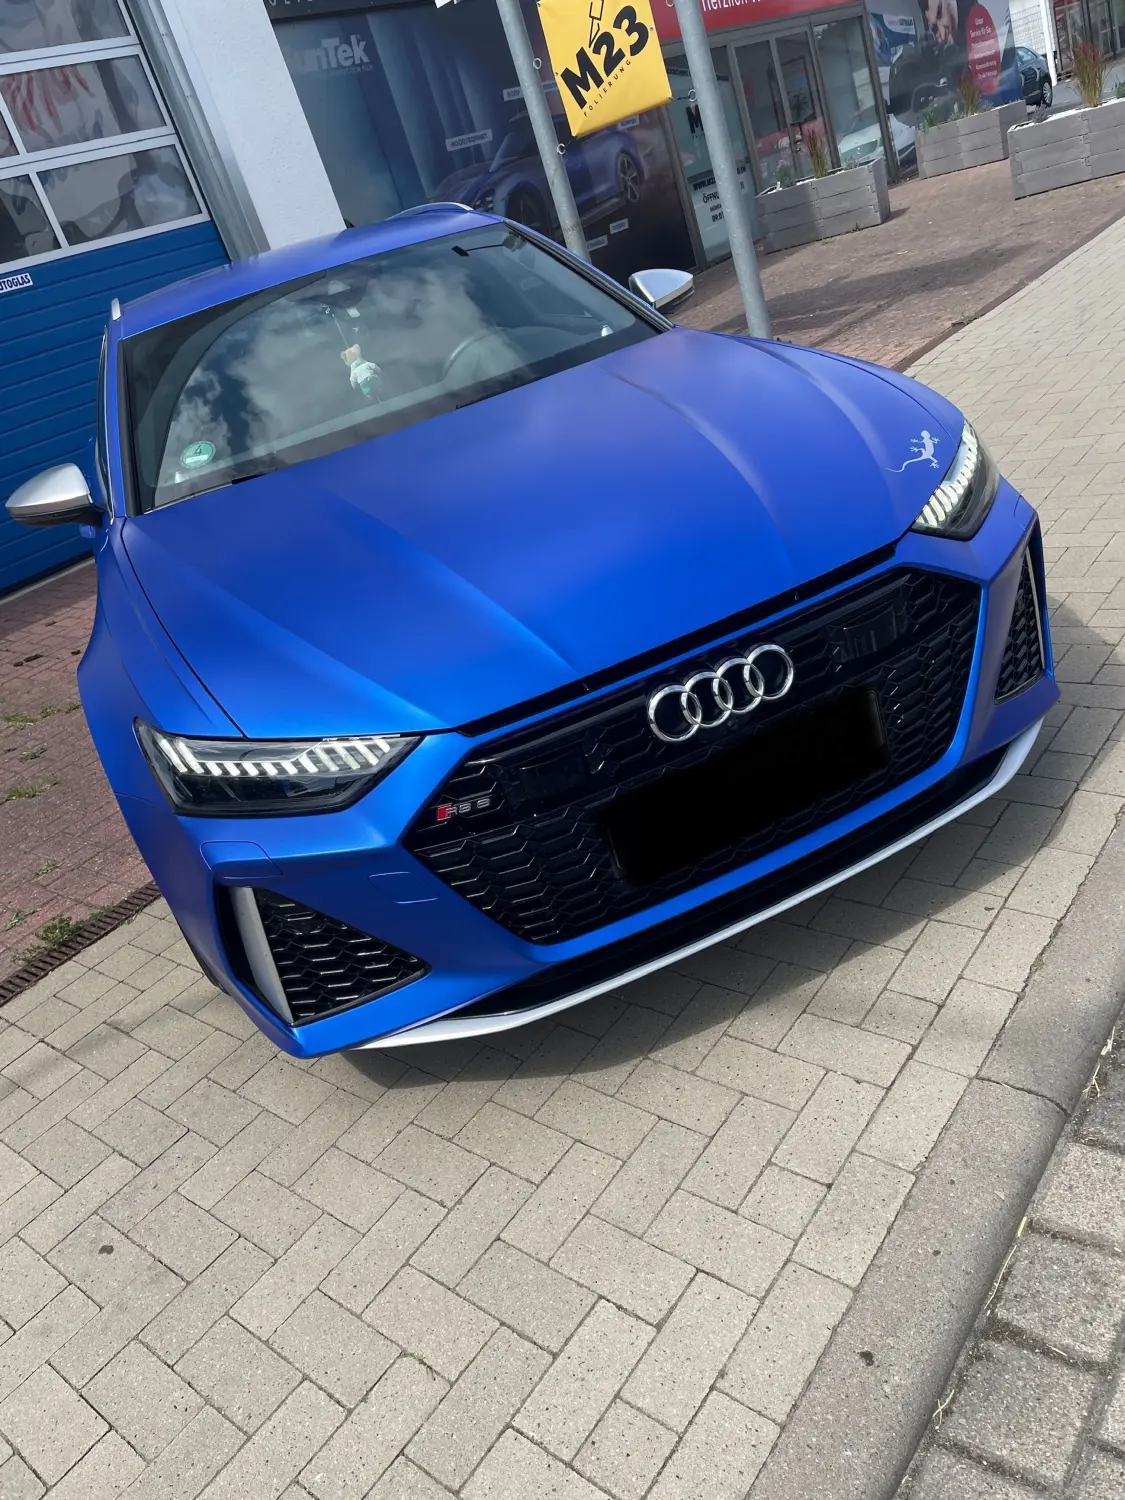 M23 FOILIERUNG, Car Wrapping, blaues Auto